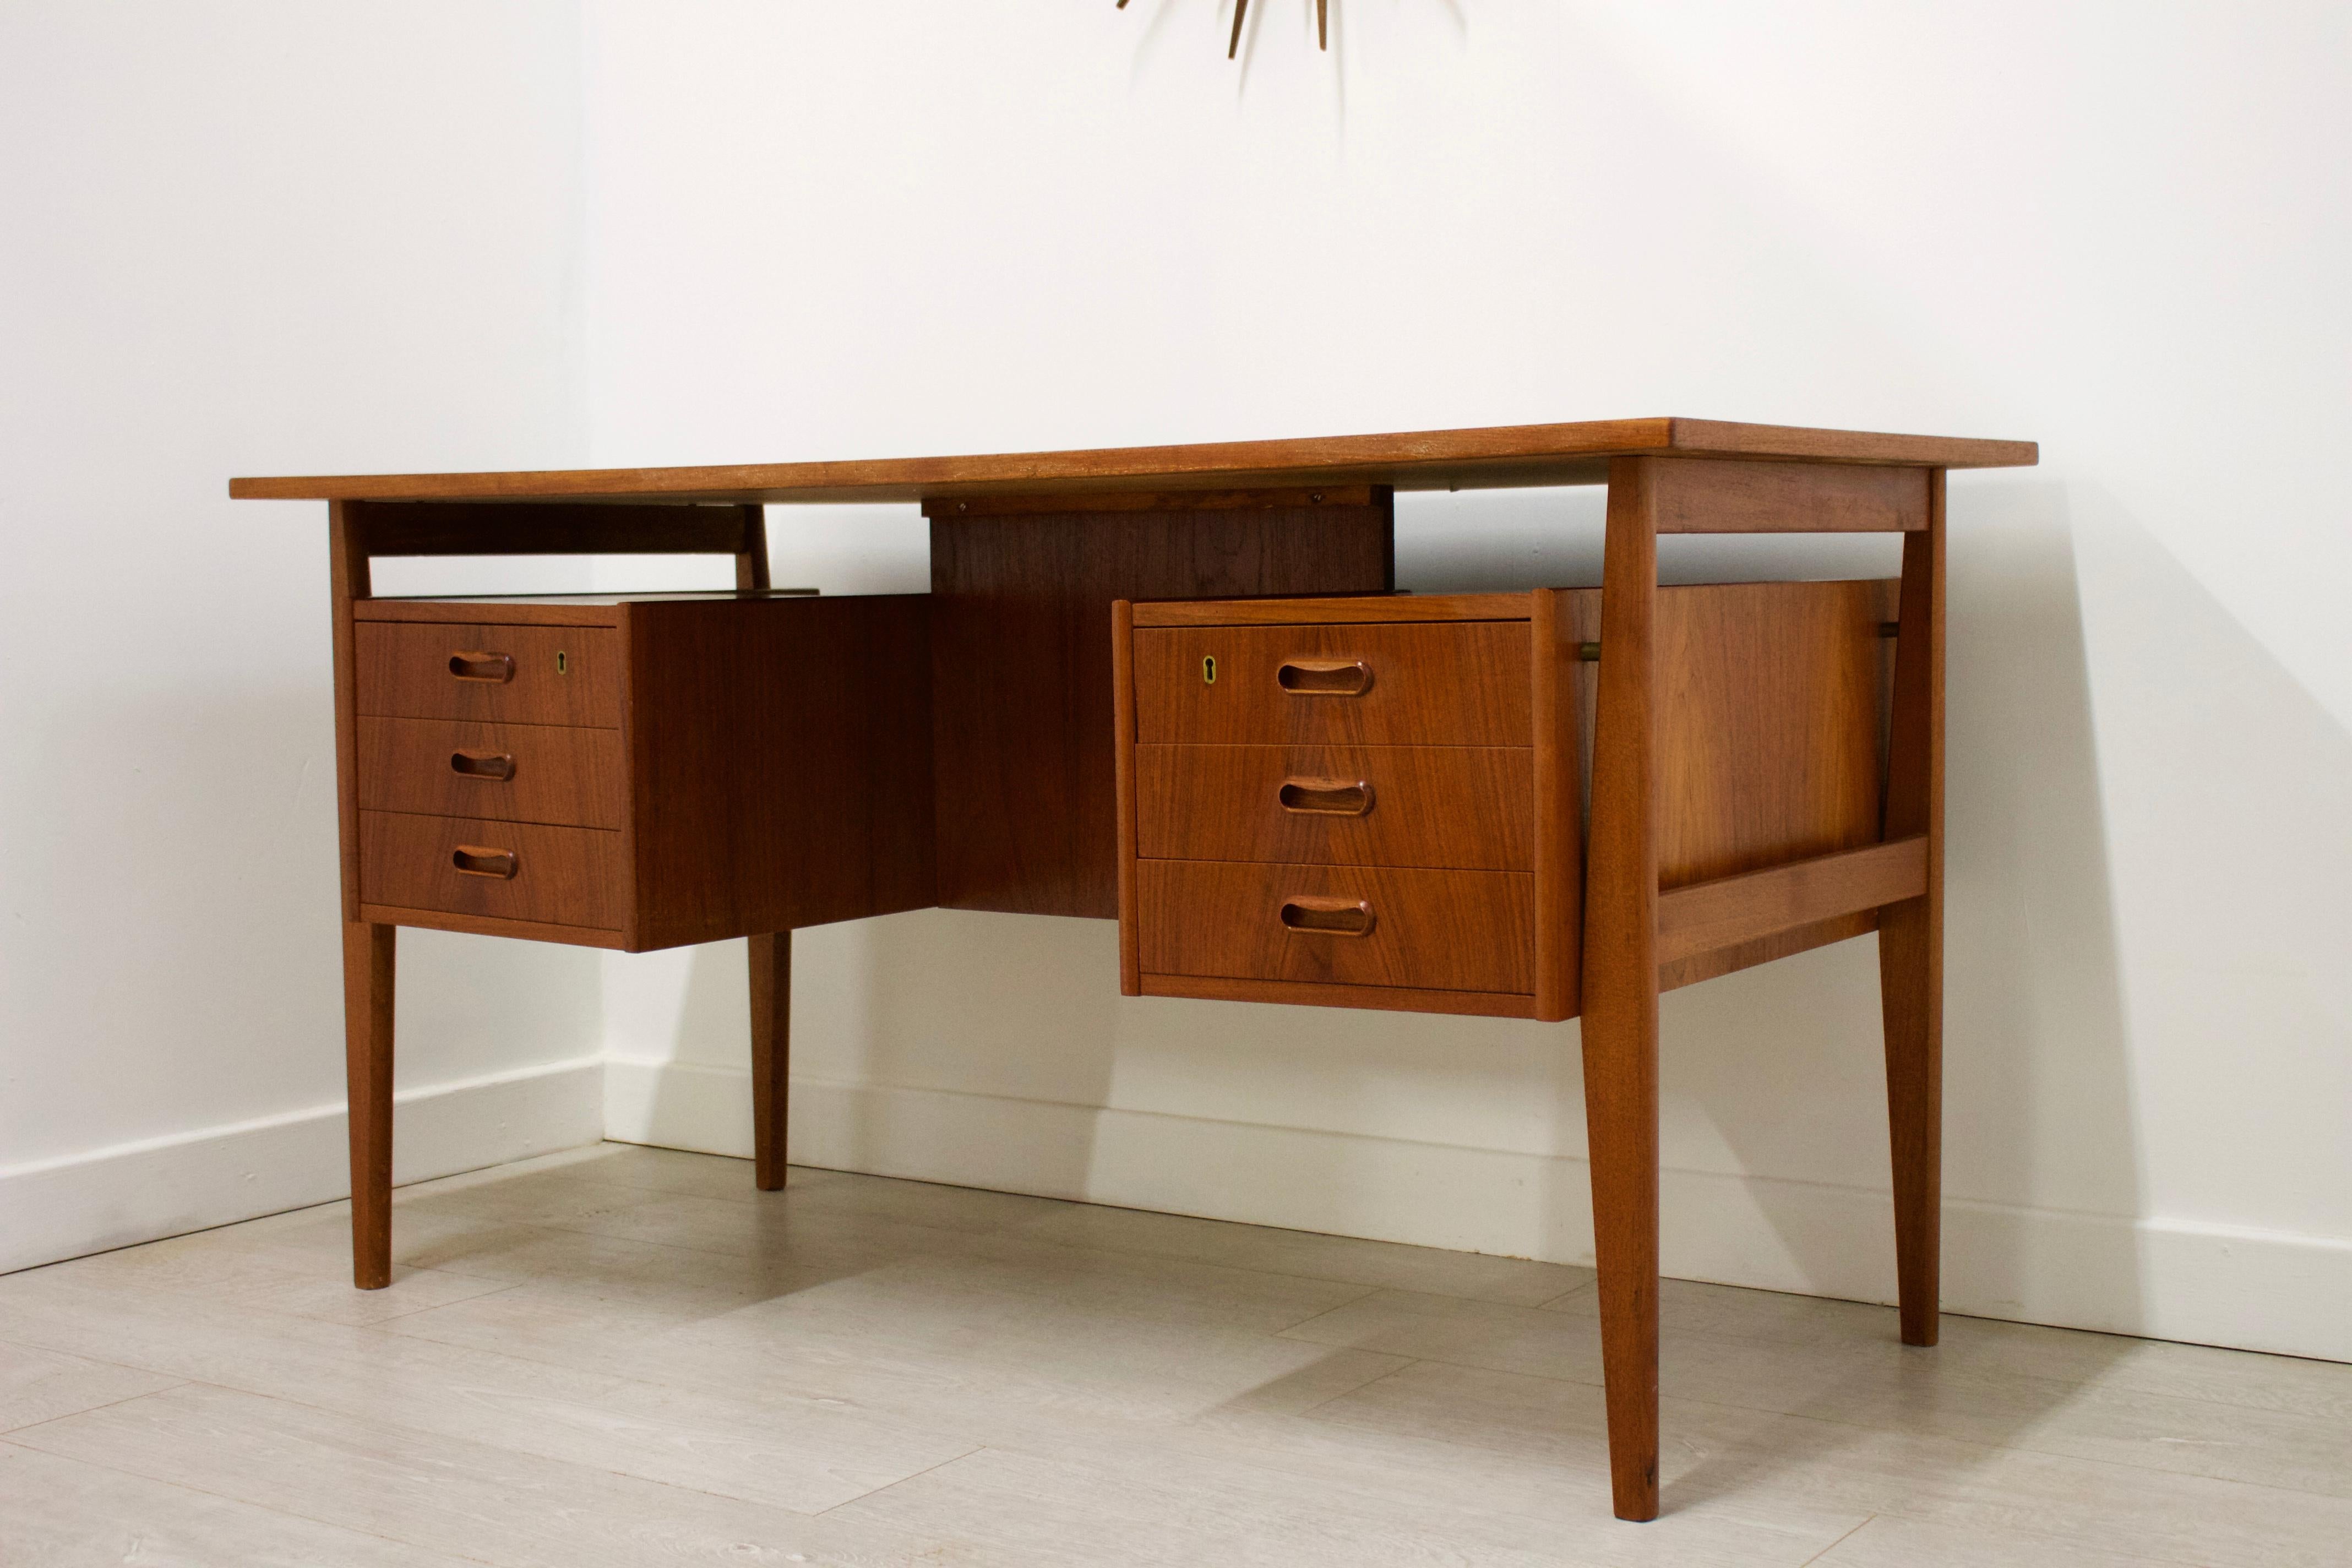 - This is a very stylish Danish teak desk in the manner of Kai Kristiansen.
- Features a floating top, 6 drawers (3 either side) and a bookshelf at the back.